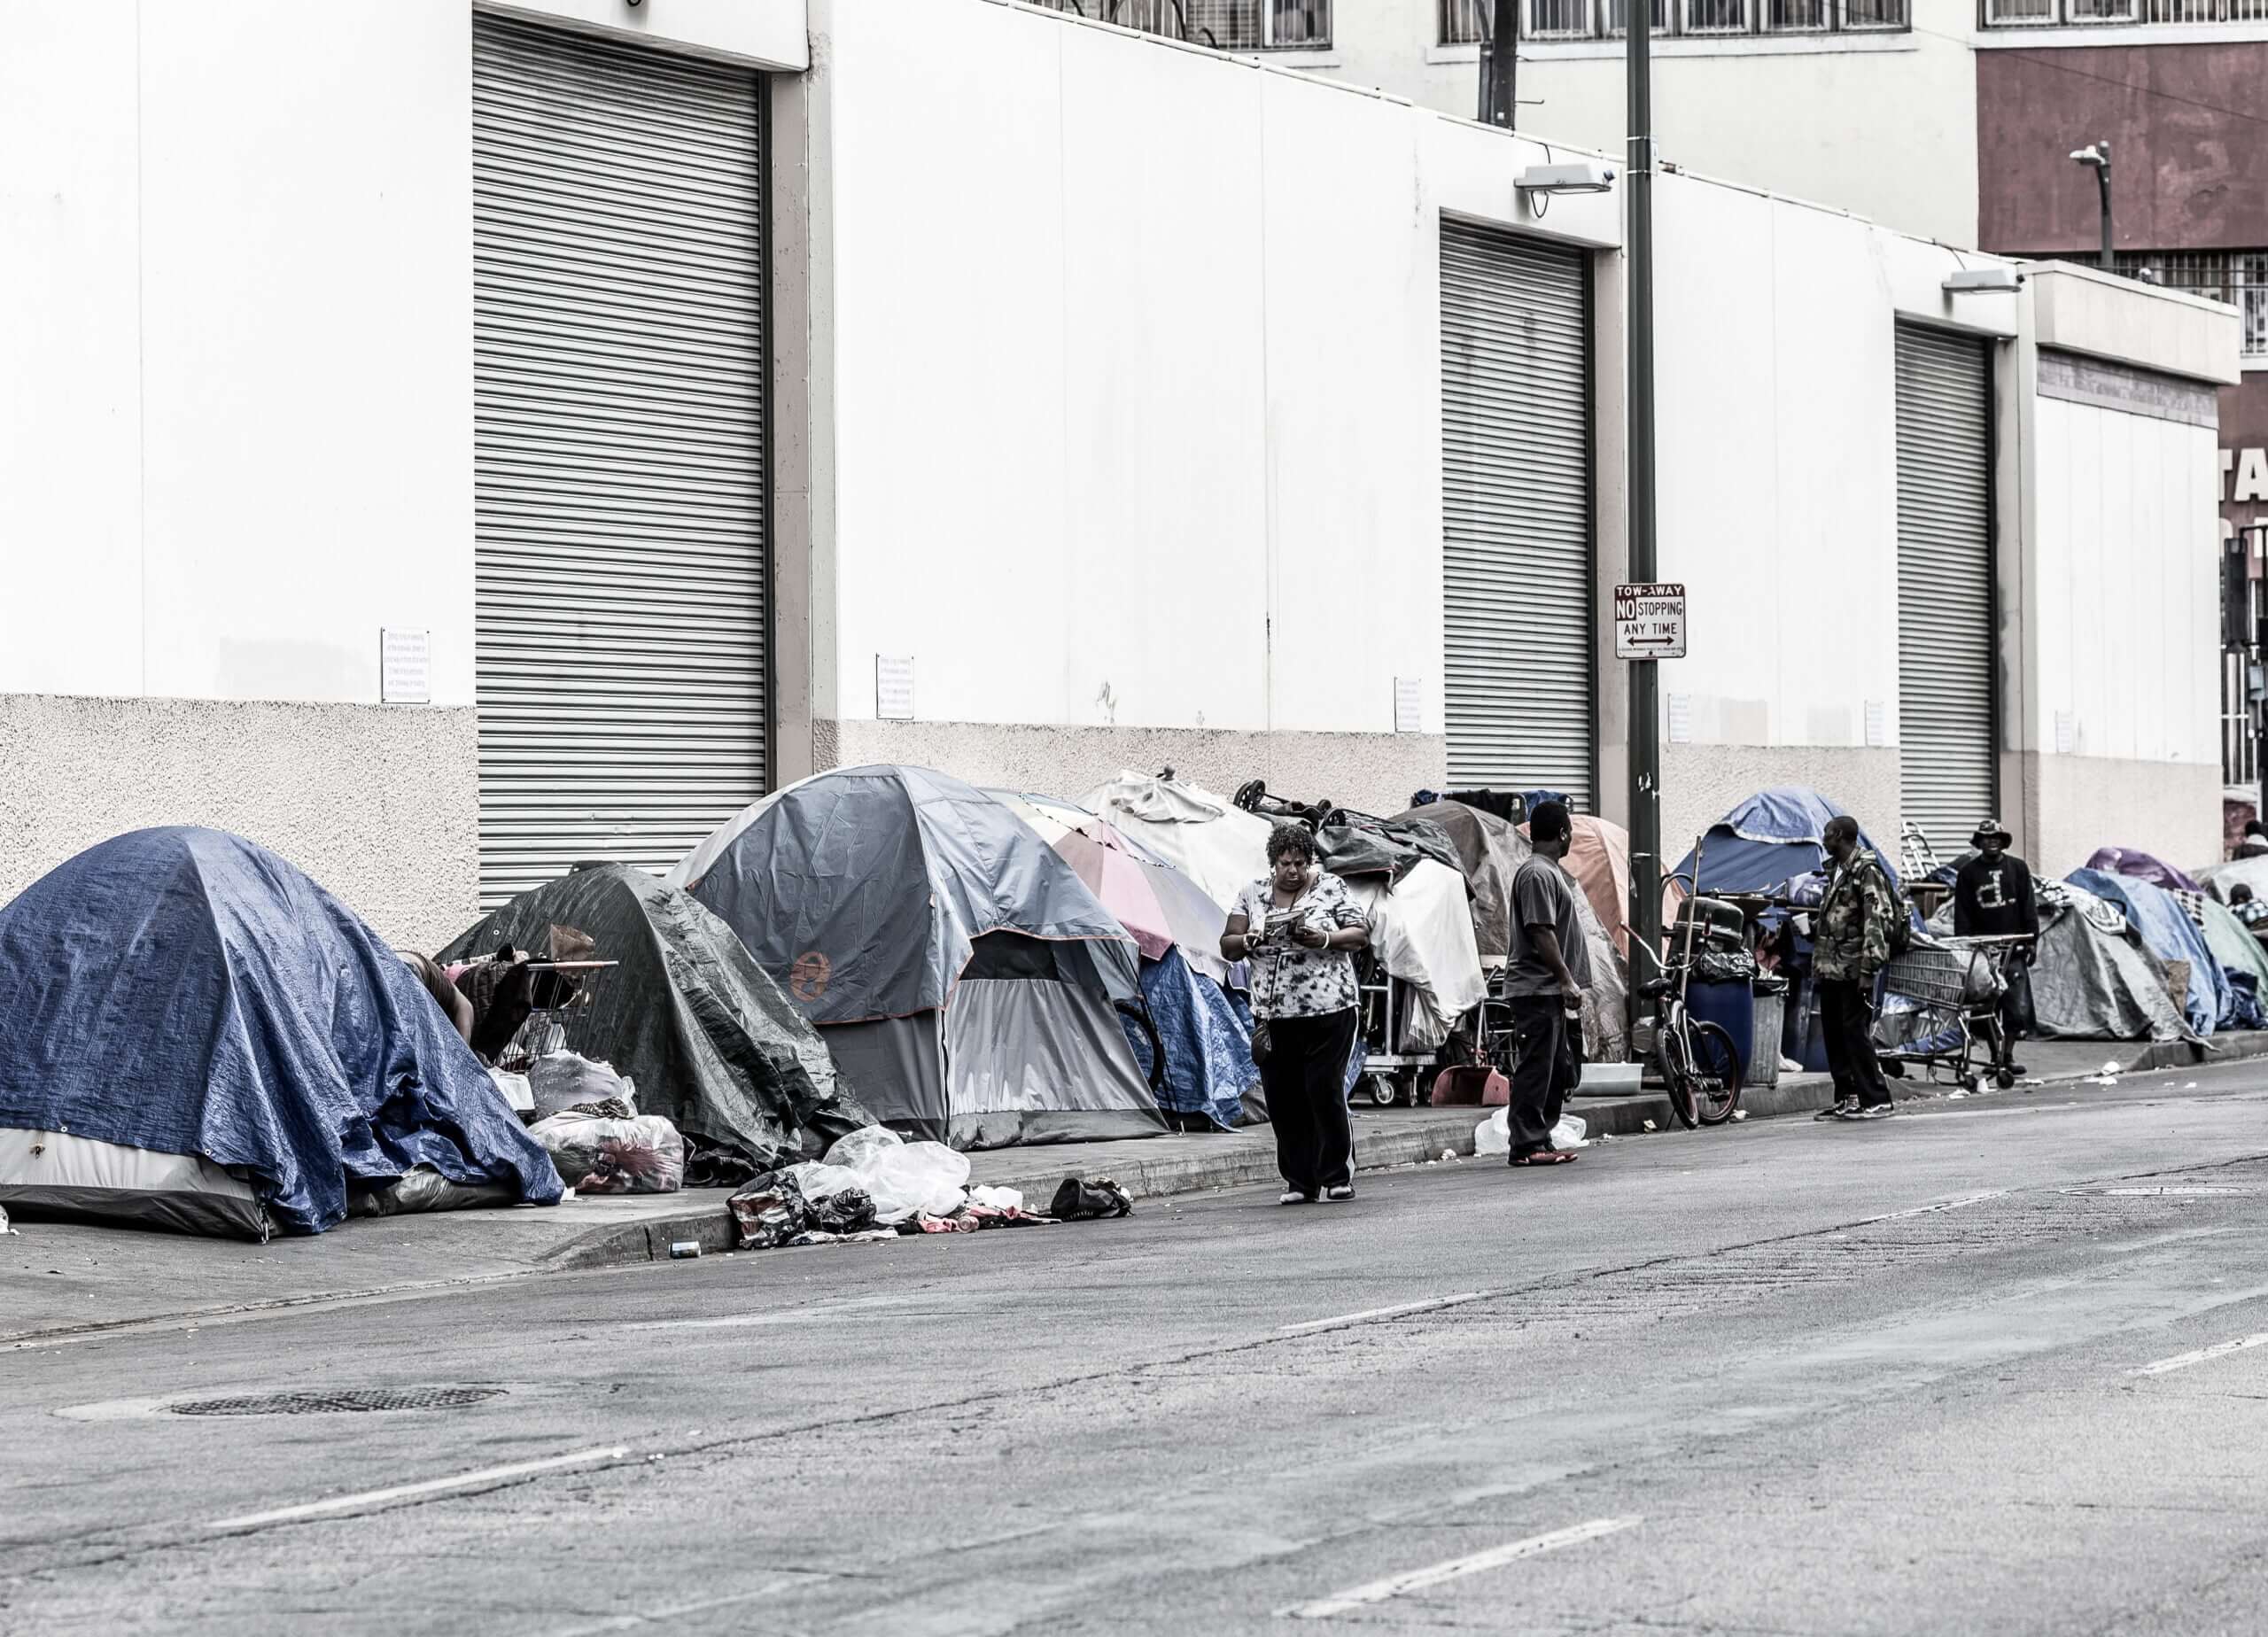 A Pastor’s Miraculous Supernatural Encounter on Skid Row